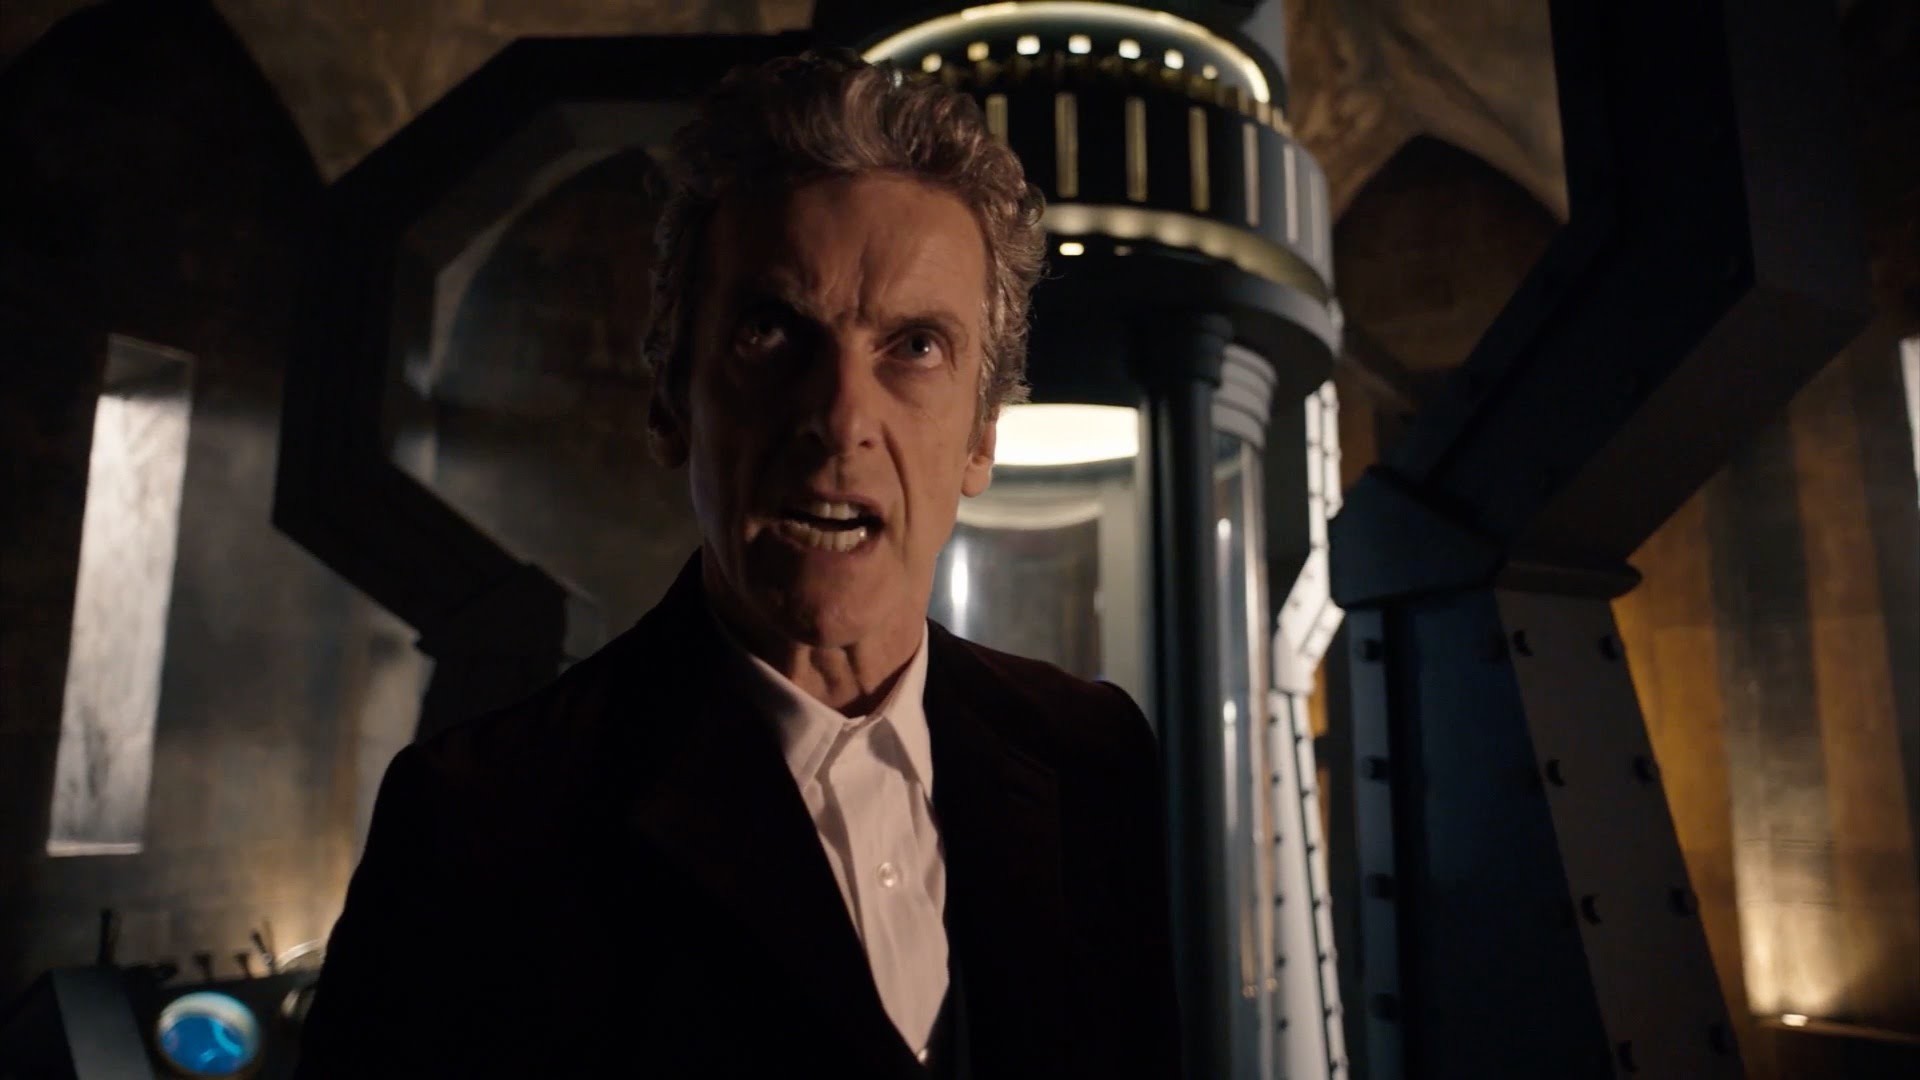 1920x1080 The Doctor is taking no prisoners - Doctor Who: Series 9 Episode 11 (2015)  - BBC